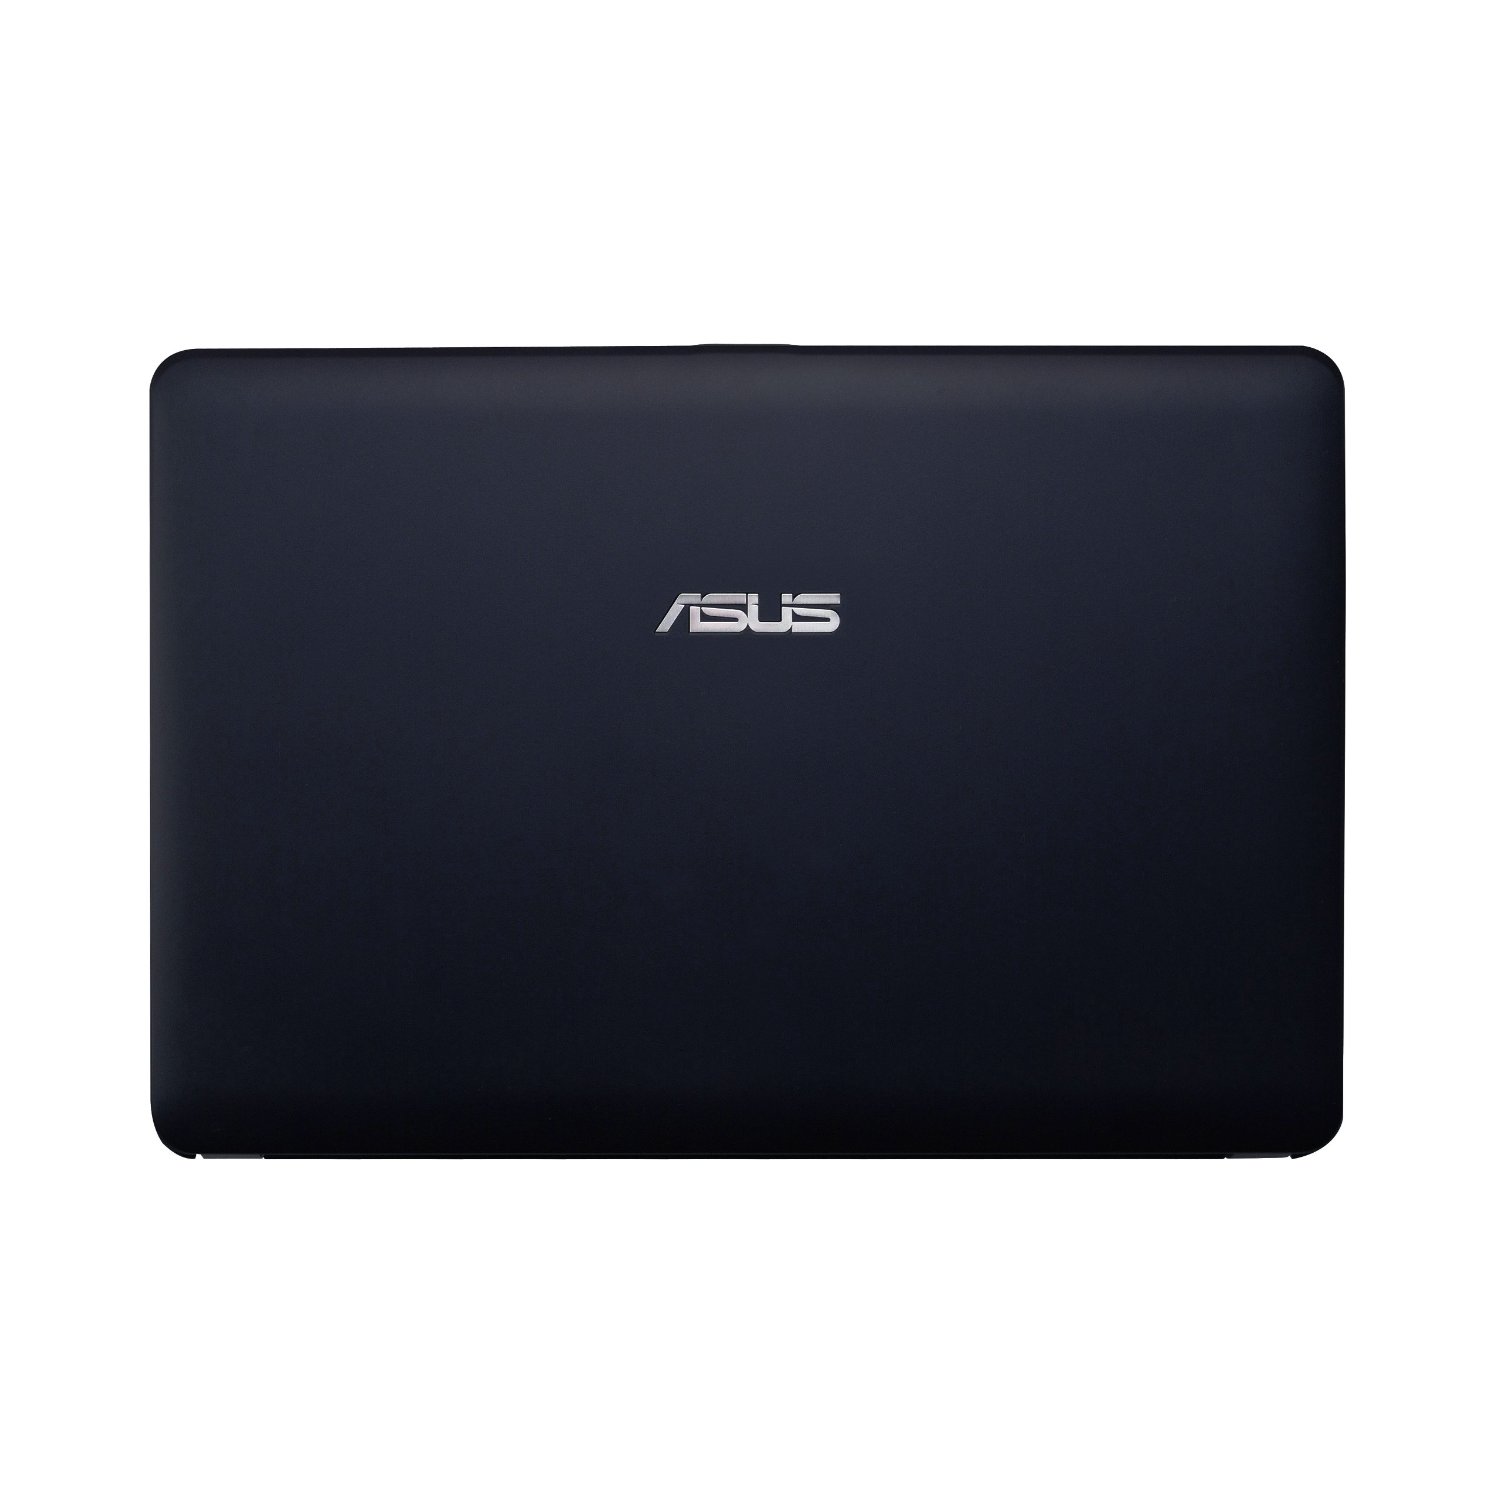 http://thetechjournal.com/wp-content/uploads/images/1112/1322737303-asus-eee-pc-1015pxsu17bk-101inch-netbook-10.jpg